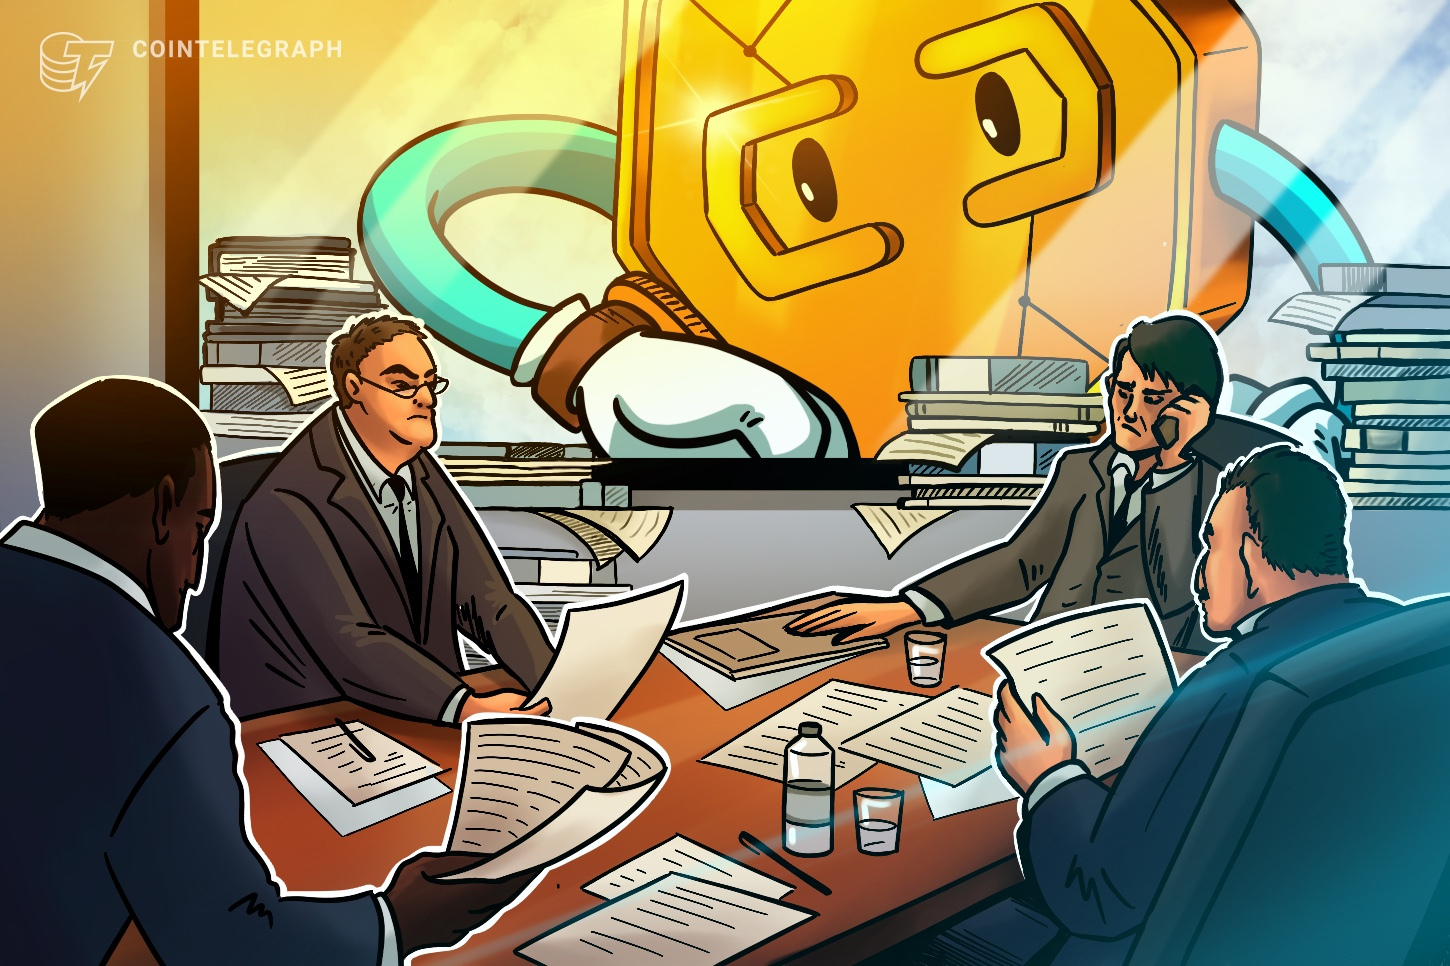 Executives at JPMorgan Chase weigh in on stablecoin regulation and crypto competition